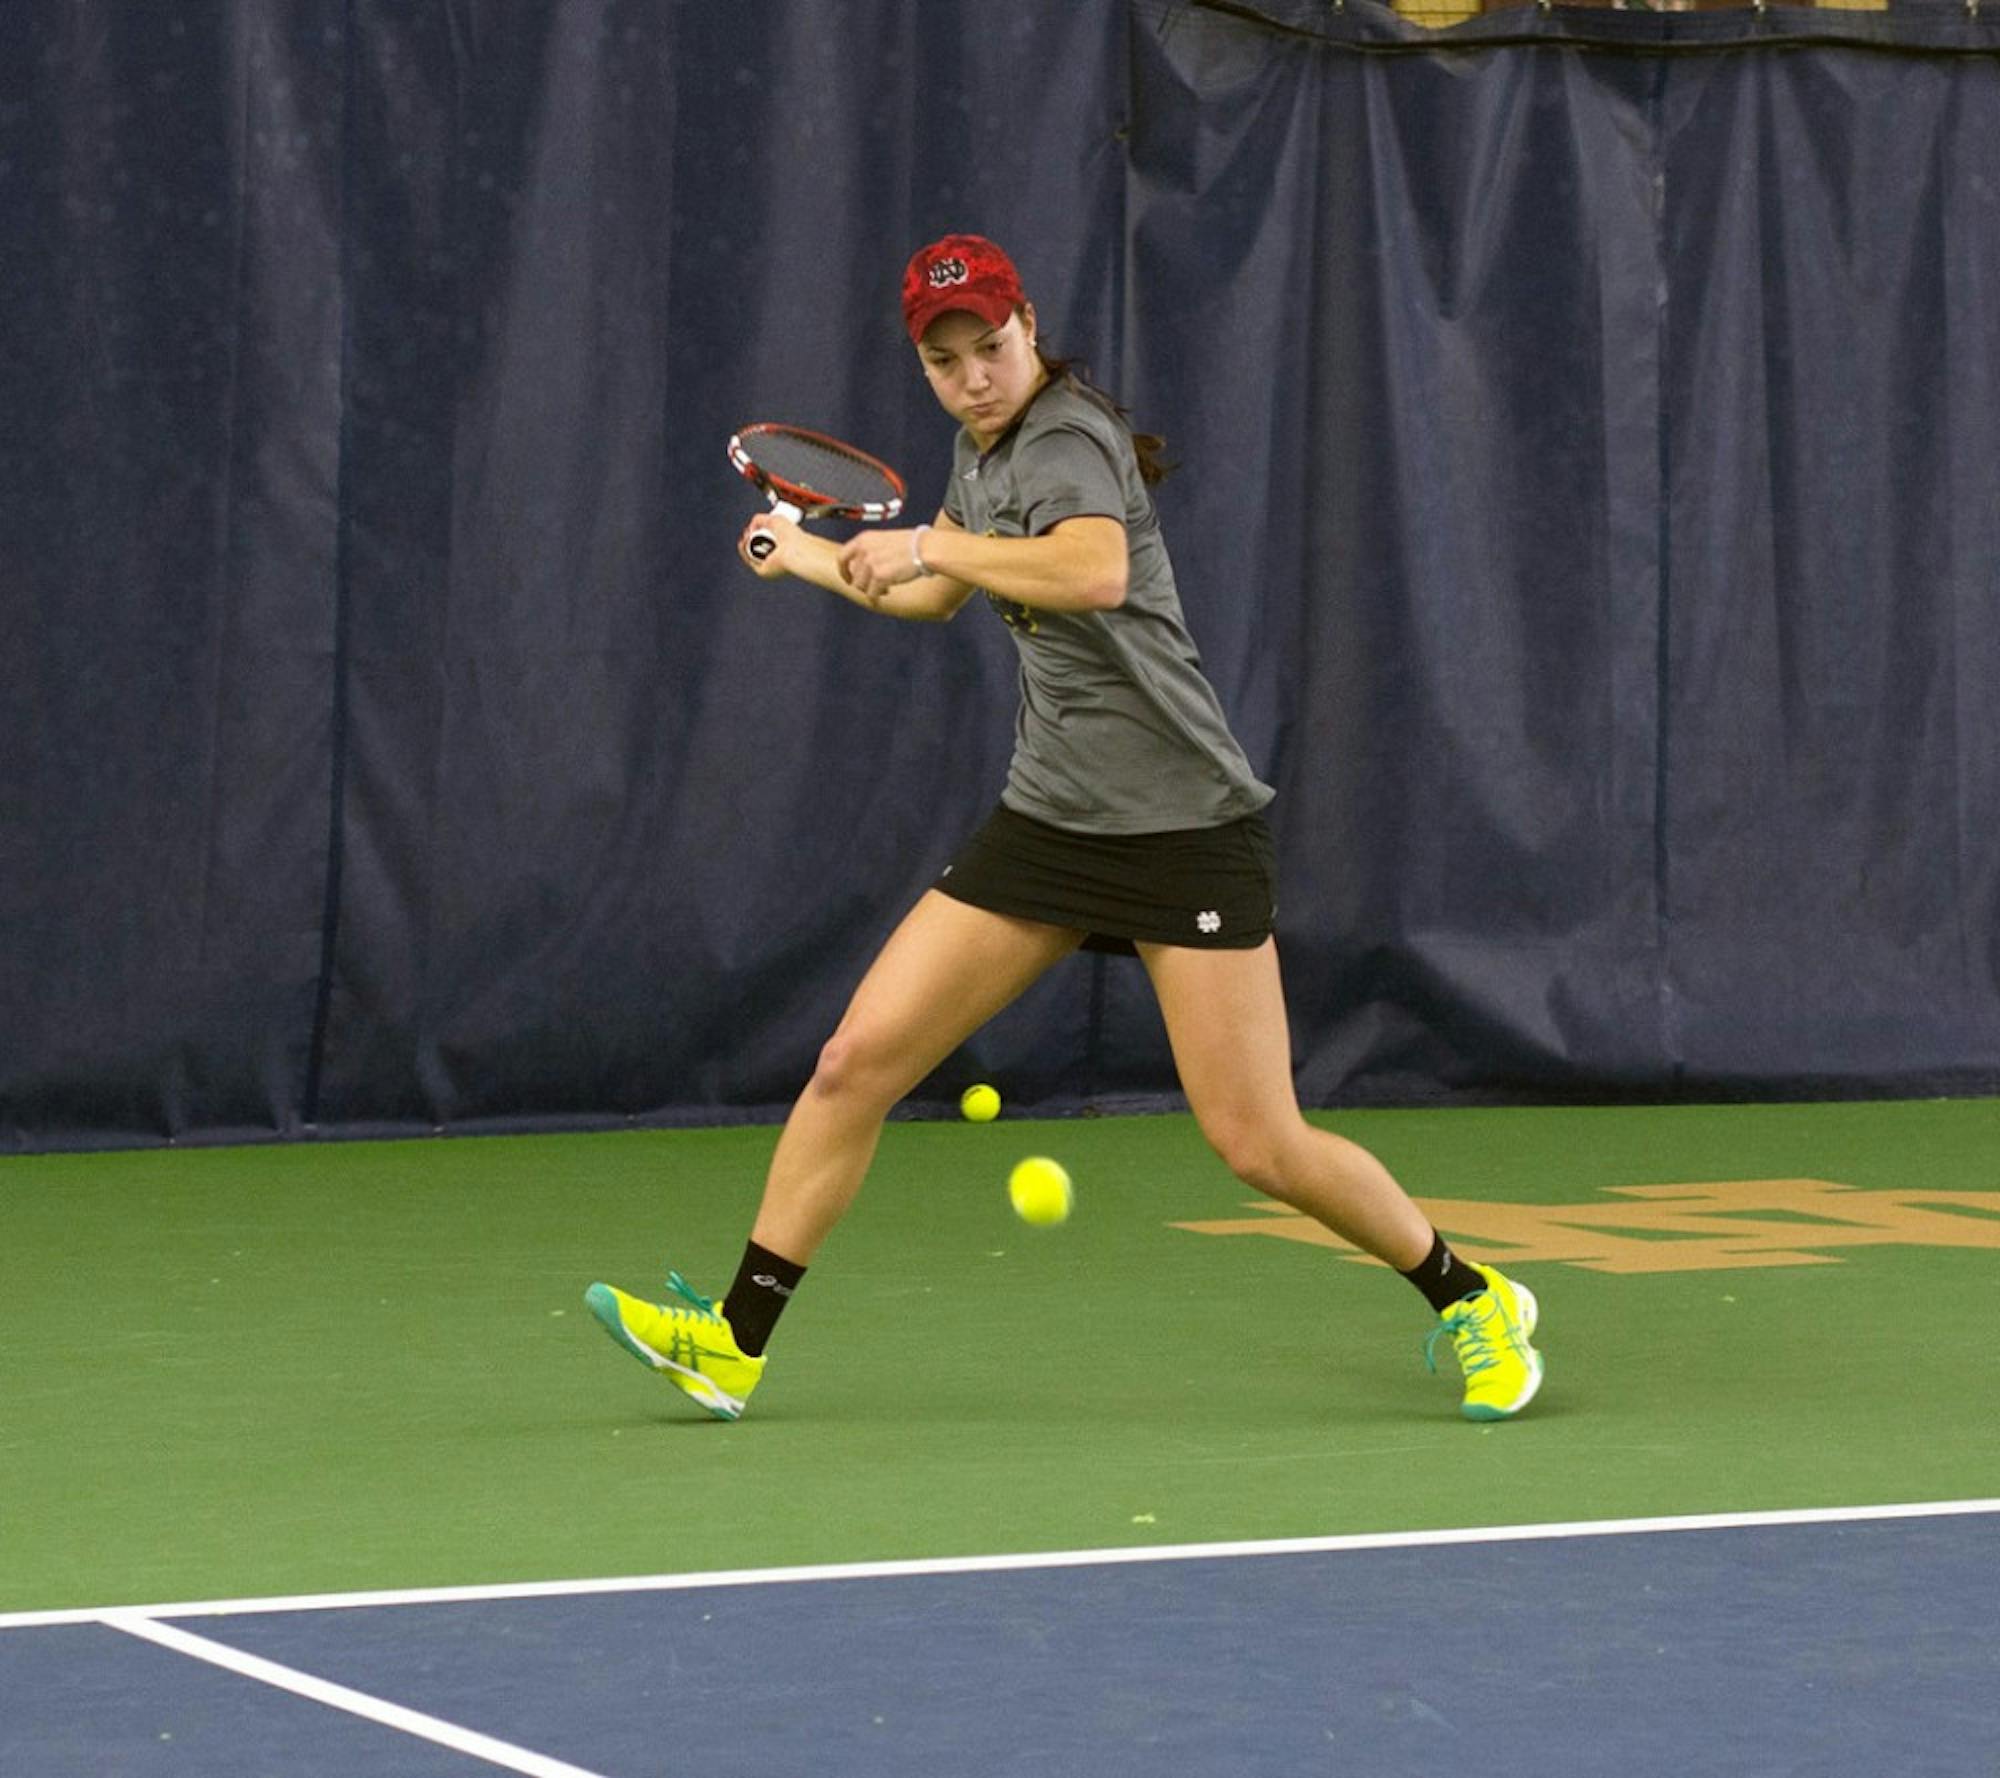 Irish senior Quinn Gleason prepares to hit a forehand during Notre Dame’s 6-1 victory over Indiana at Eck Tennis Pavilion on Feb. 20. Gleason held a 20-12 record, the second best on the Irish squad.